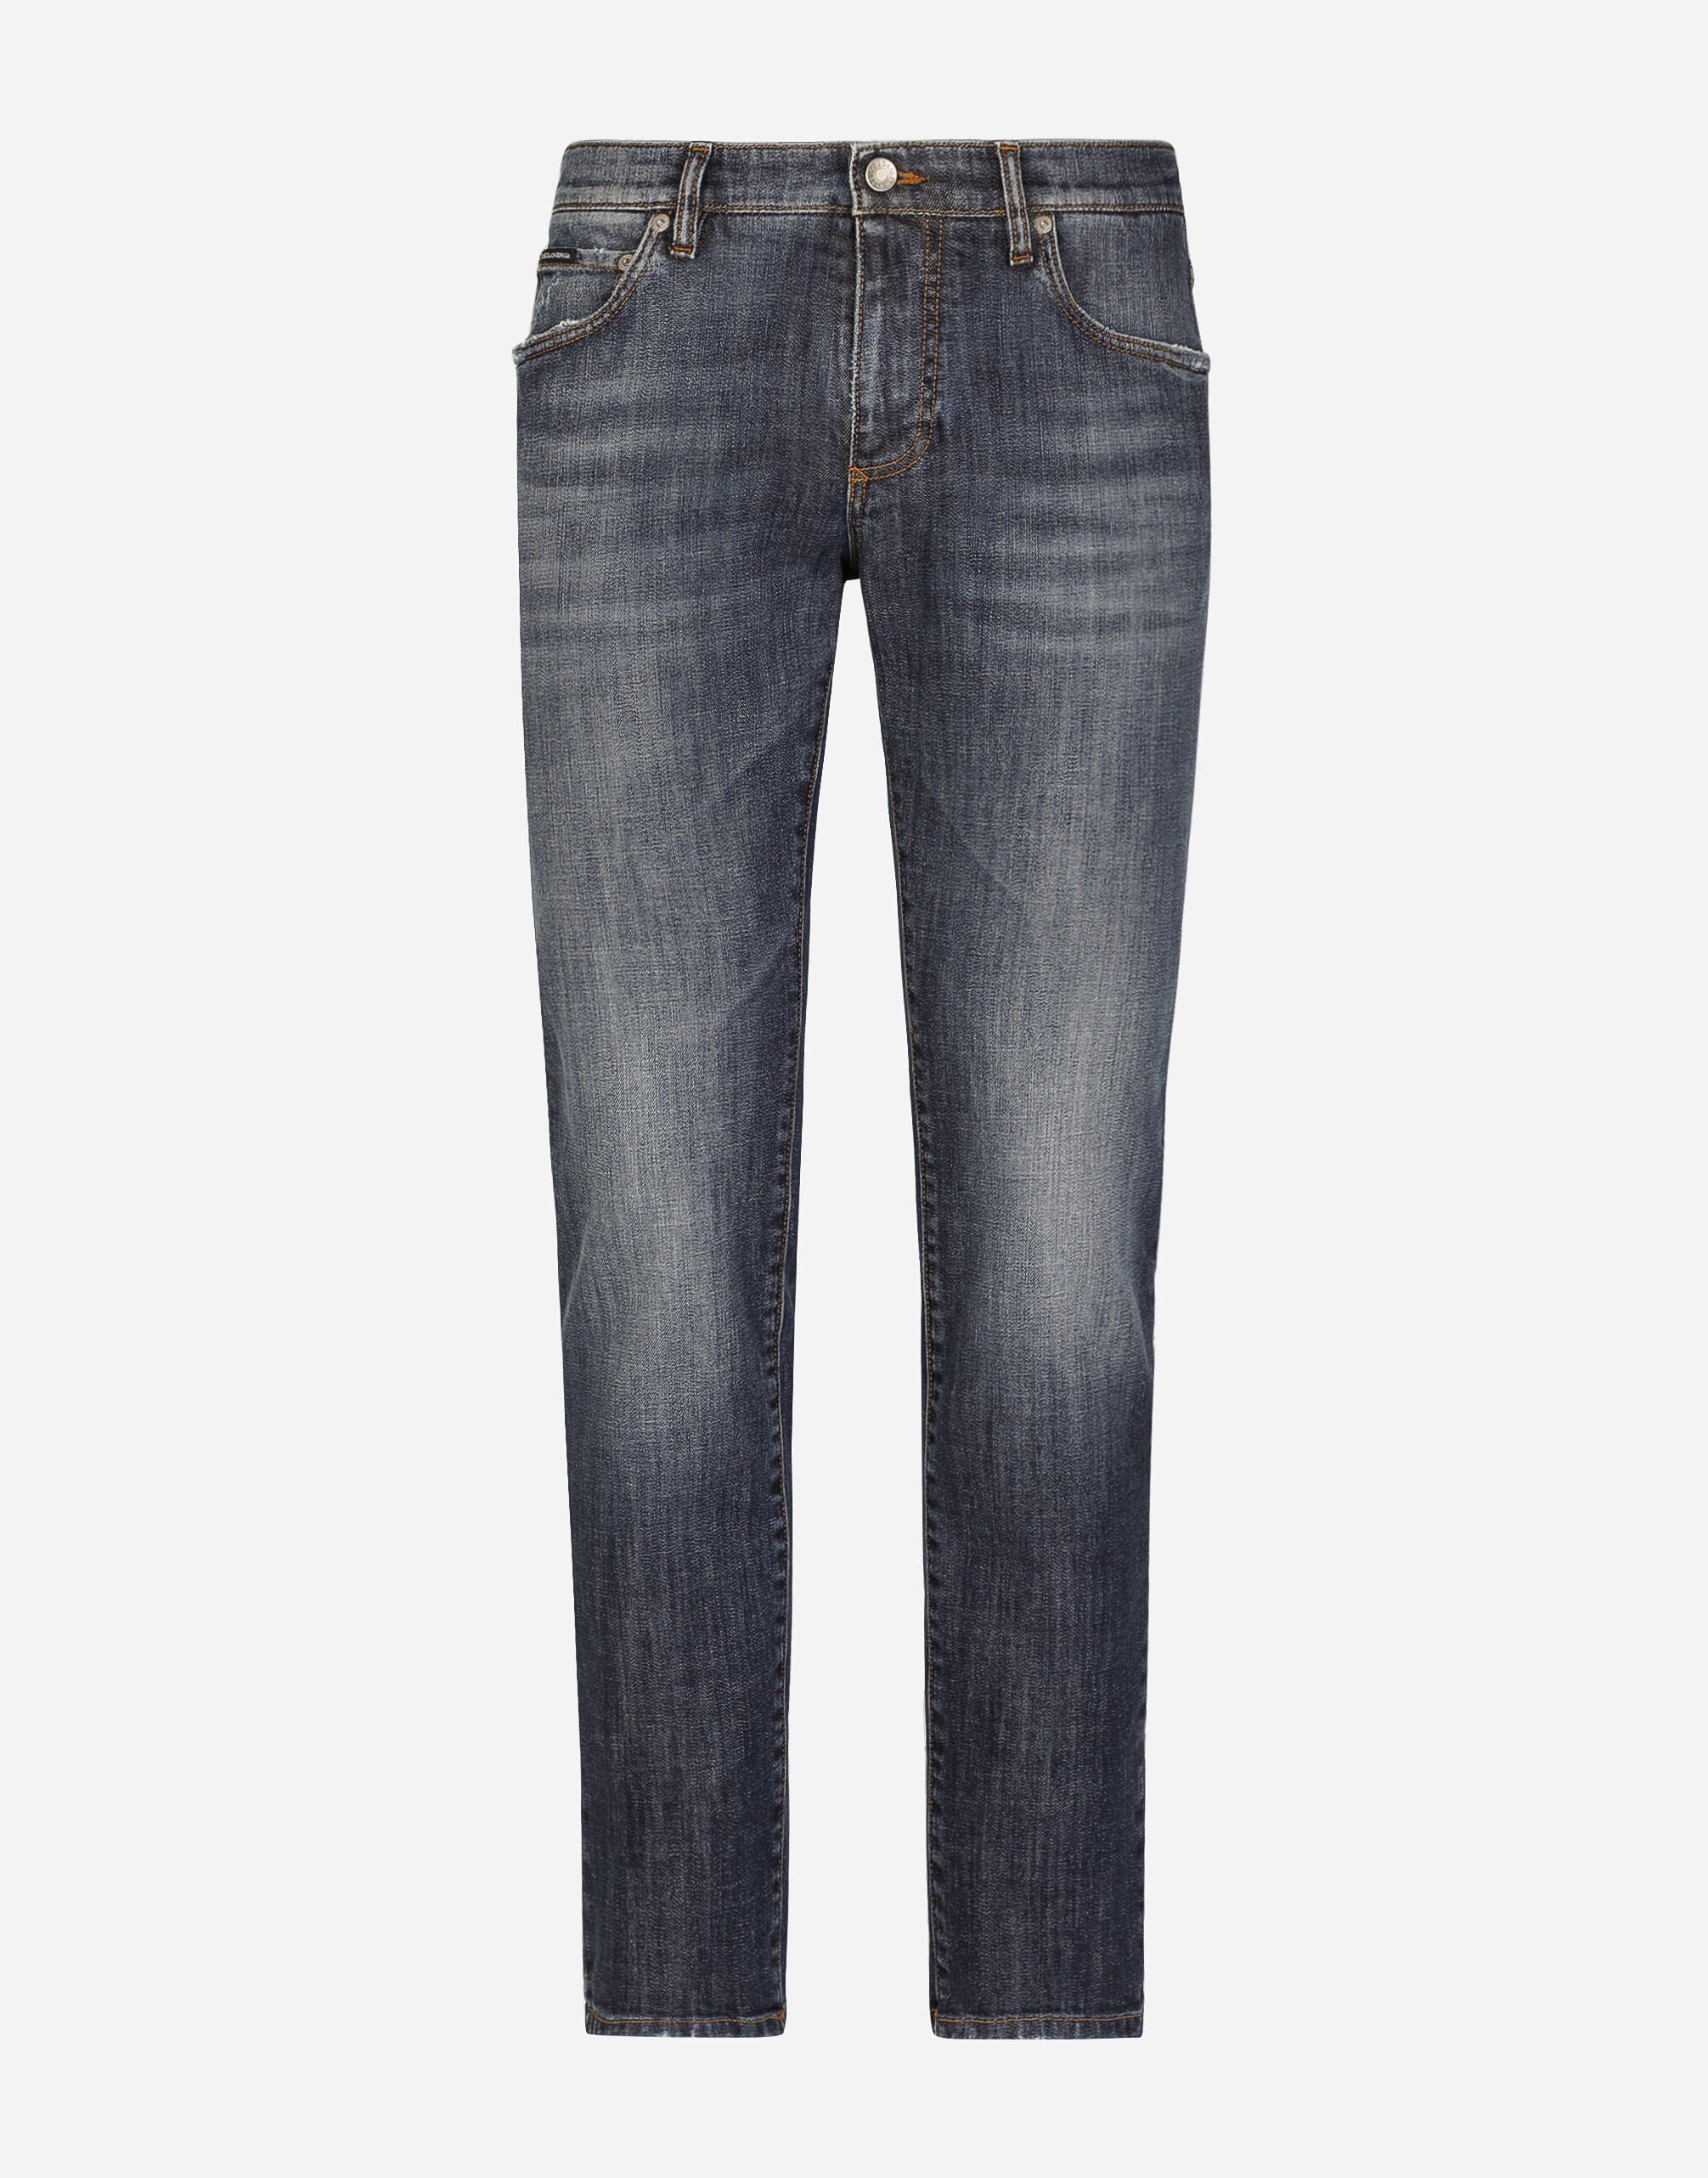 Dolce&Gabbana Slim fit washed stretch jeans with subtle abrasions Multicolor GY07LDG8JT3